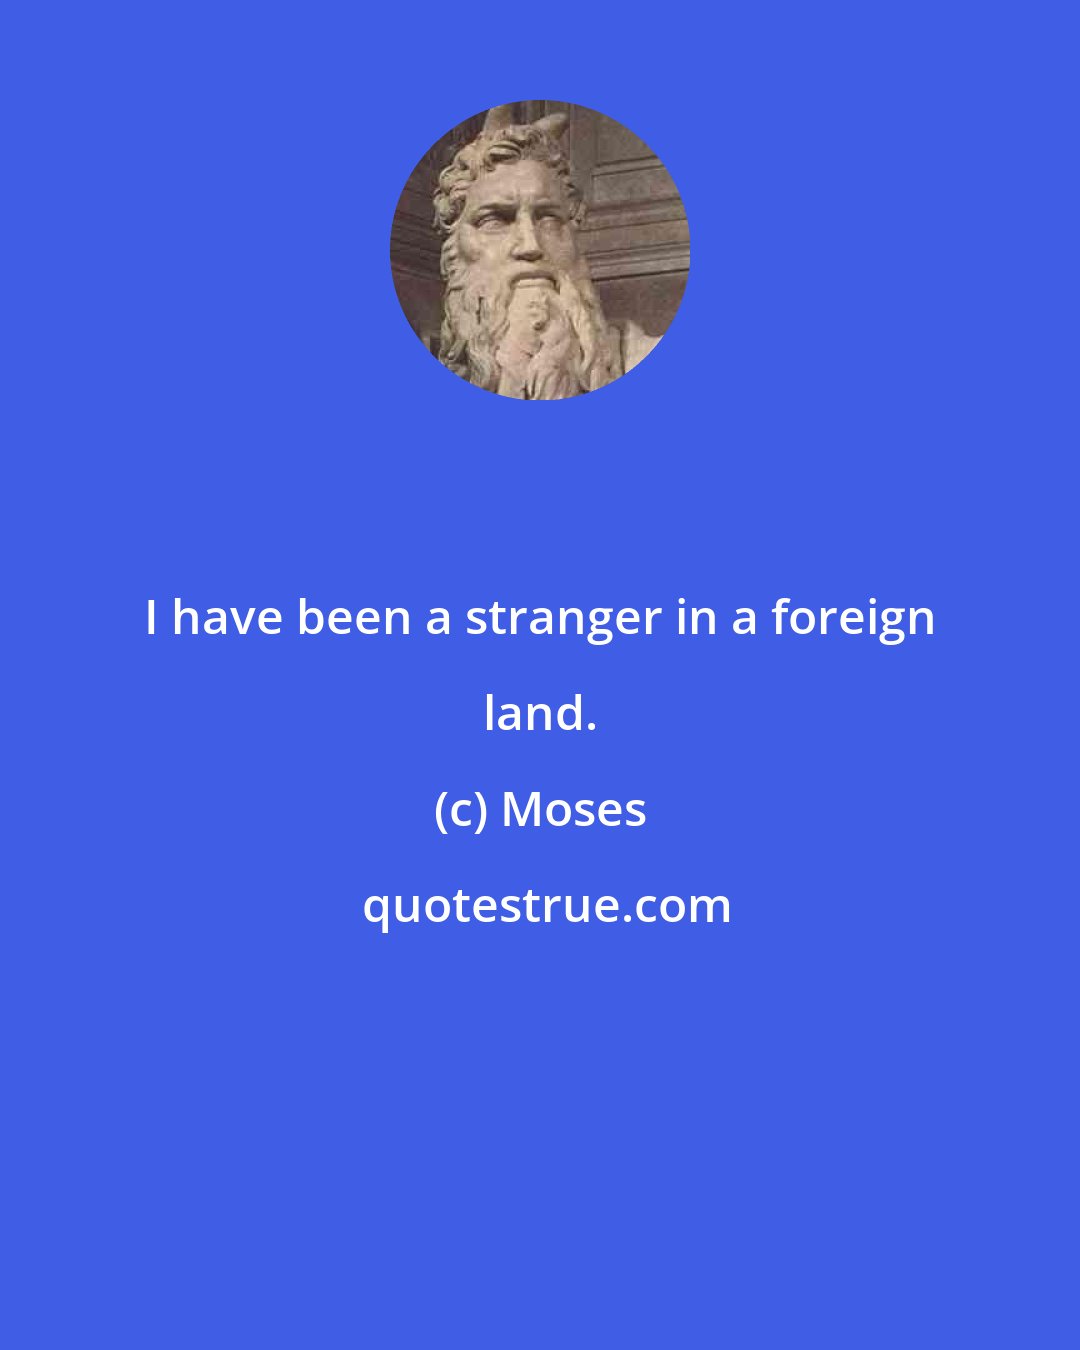 Moses: I have been a stranger in a foreign land.